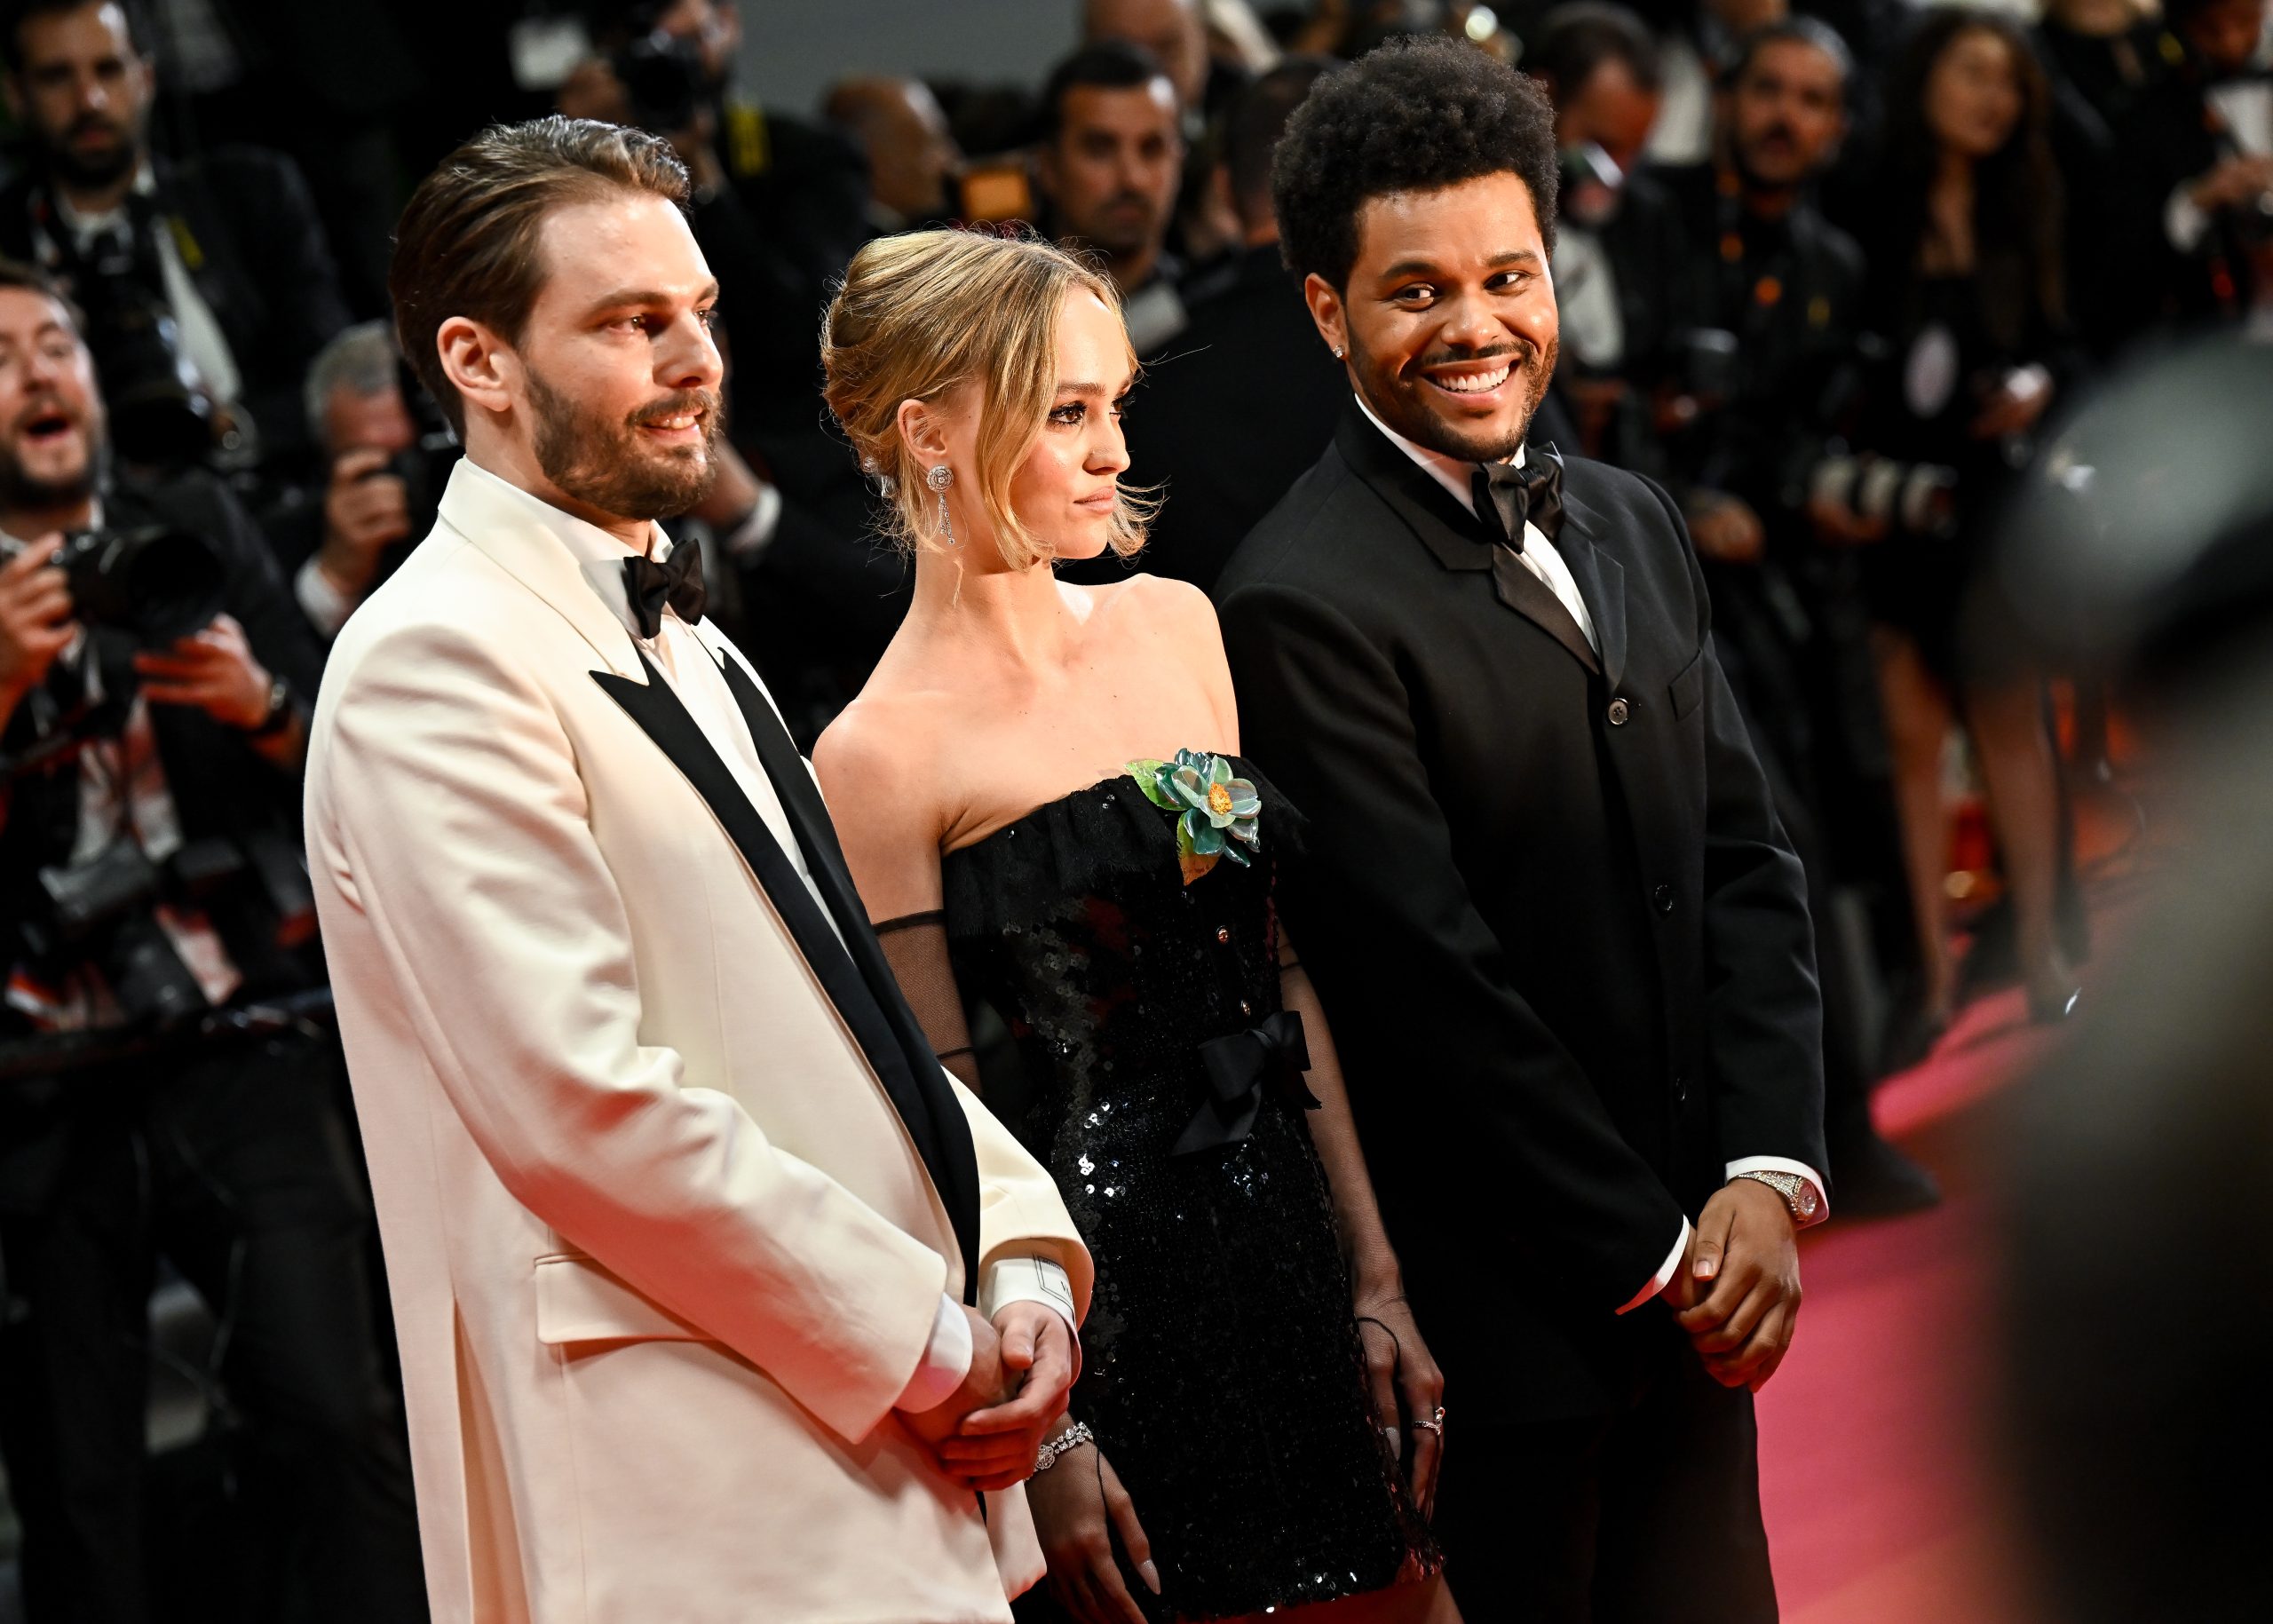 Sam Levinson, Lily-Rose Depp and Abel “The Weeknd” Tesfaye at the "The Idol" Screening & Red Carpet at the 76th Cannes Film Festival held at the Palais des Festivals on May 22, 2023 in Cannes, France.